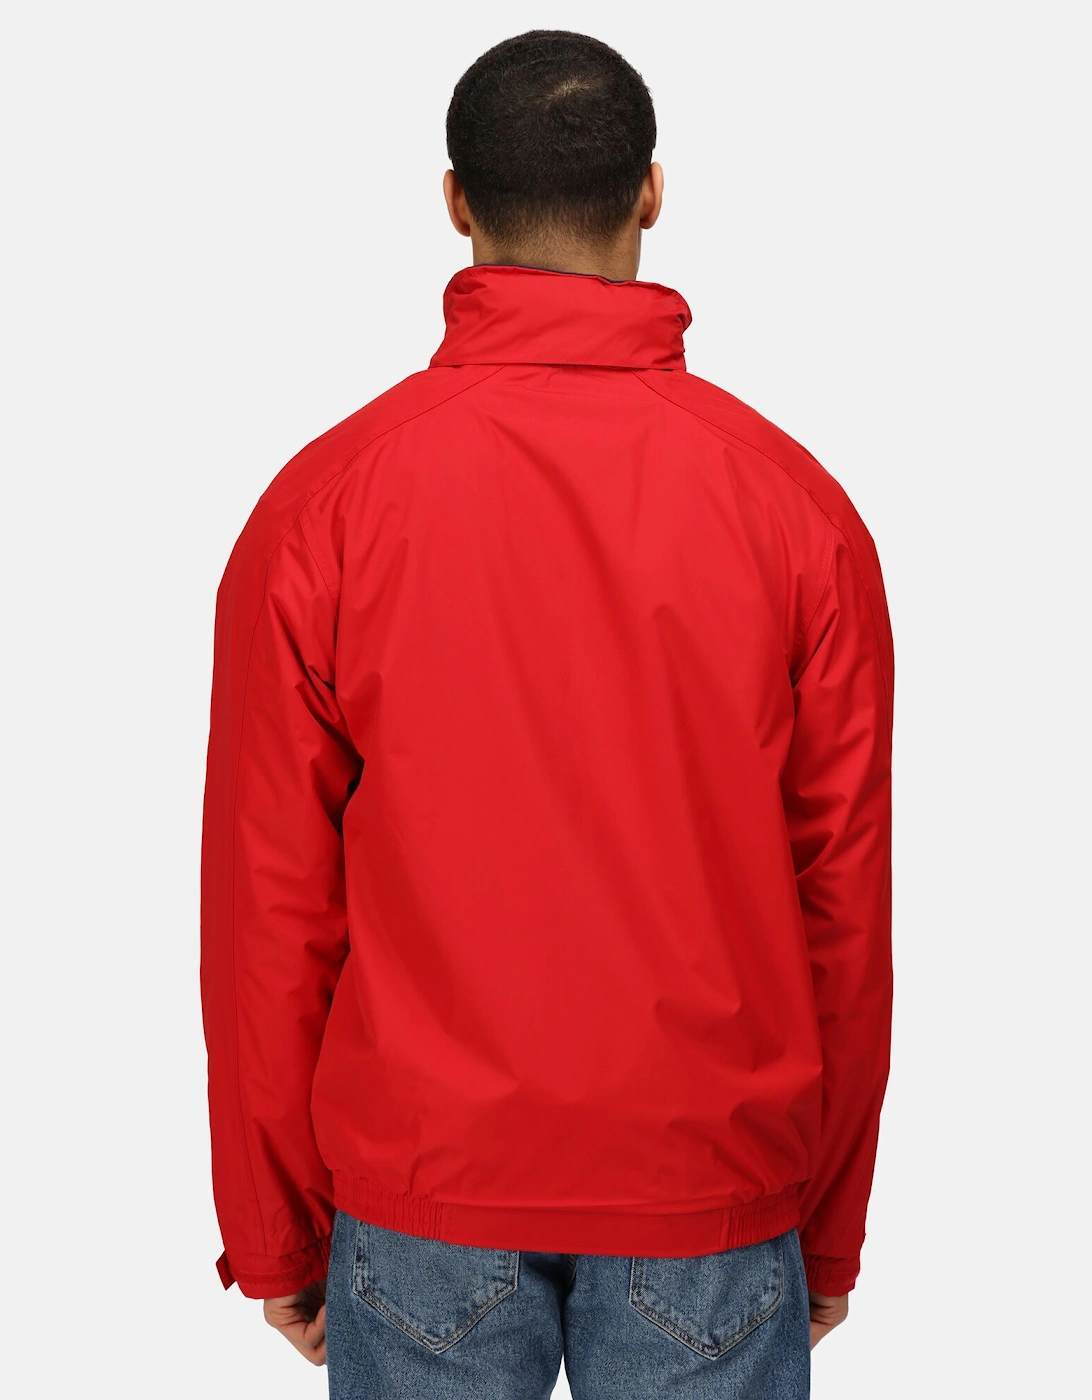 Dover Waterproof Windproof Jacket (Thermo-Guard Insulation)